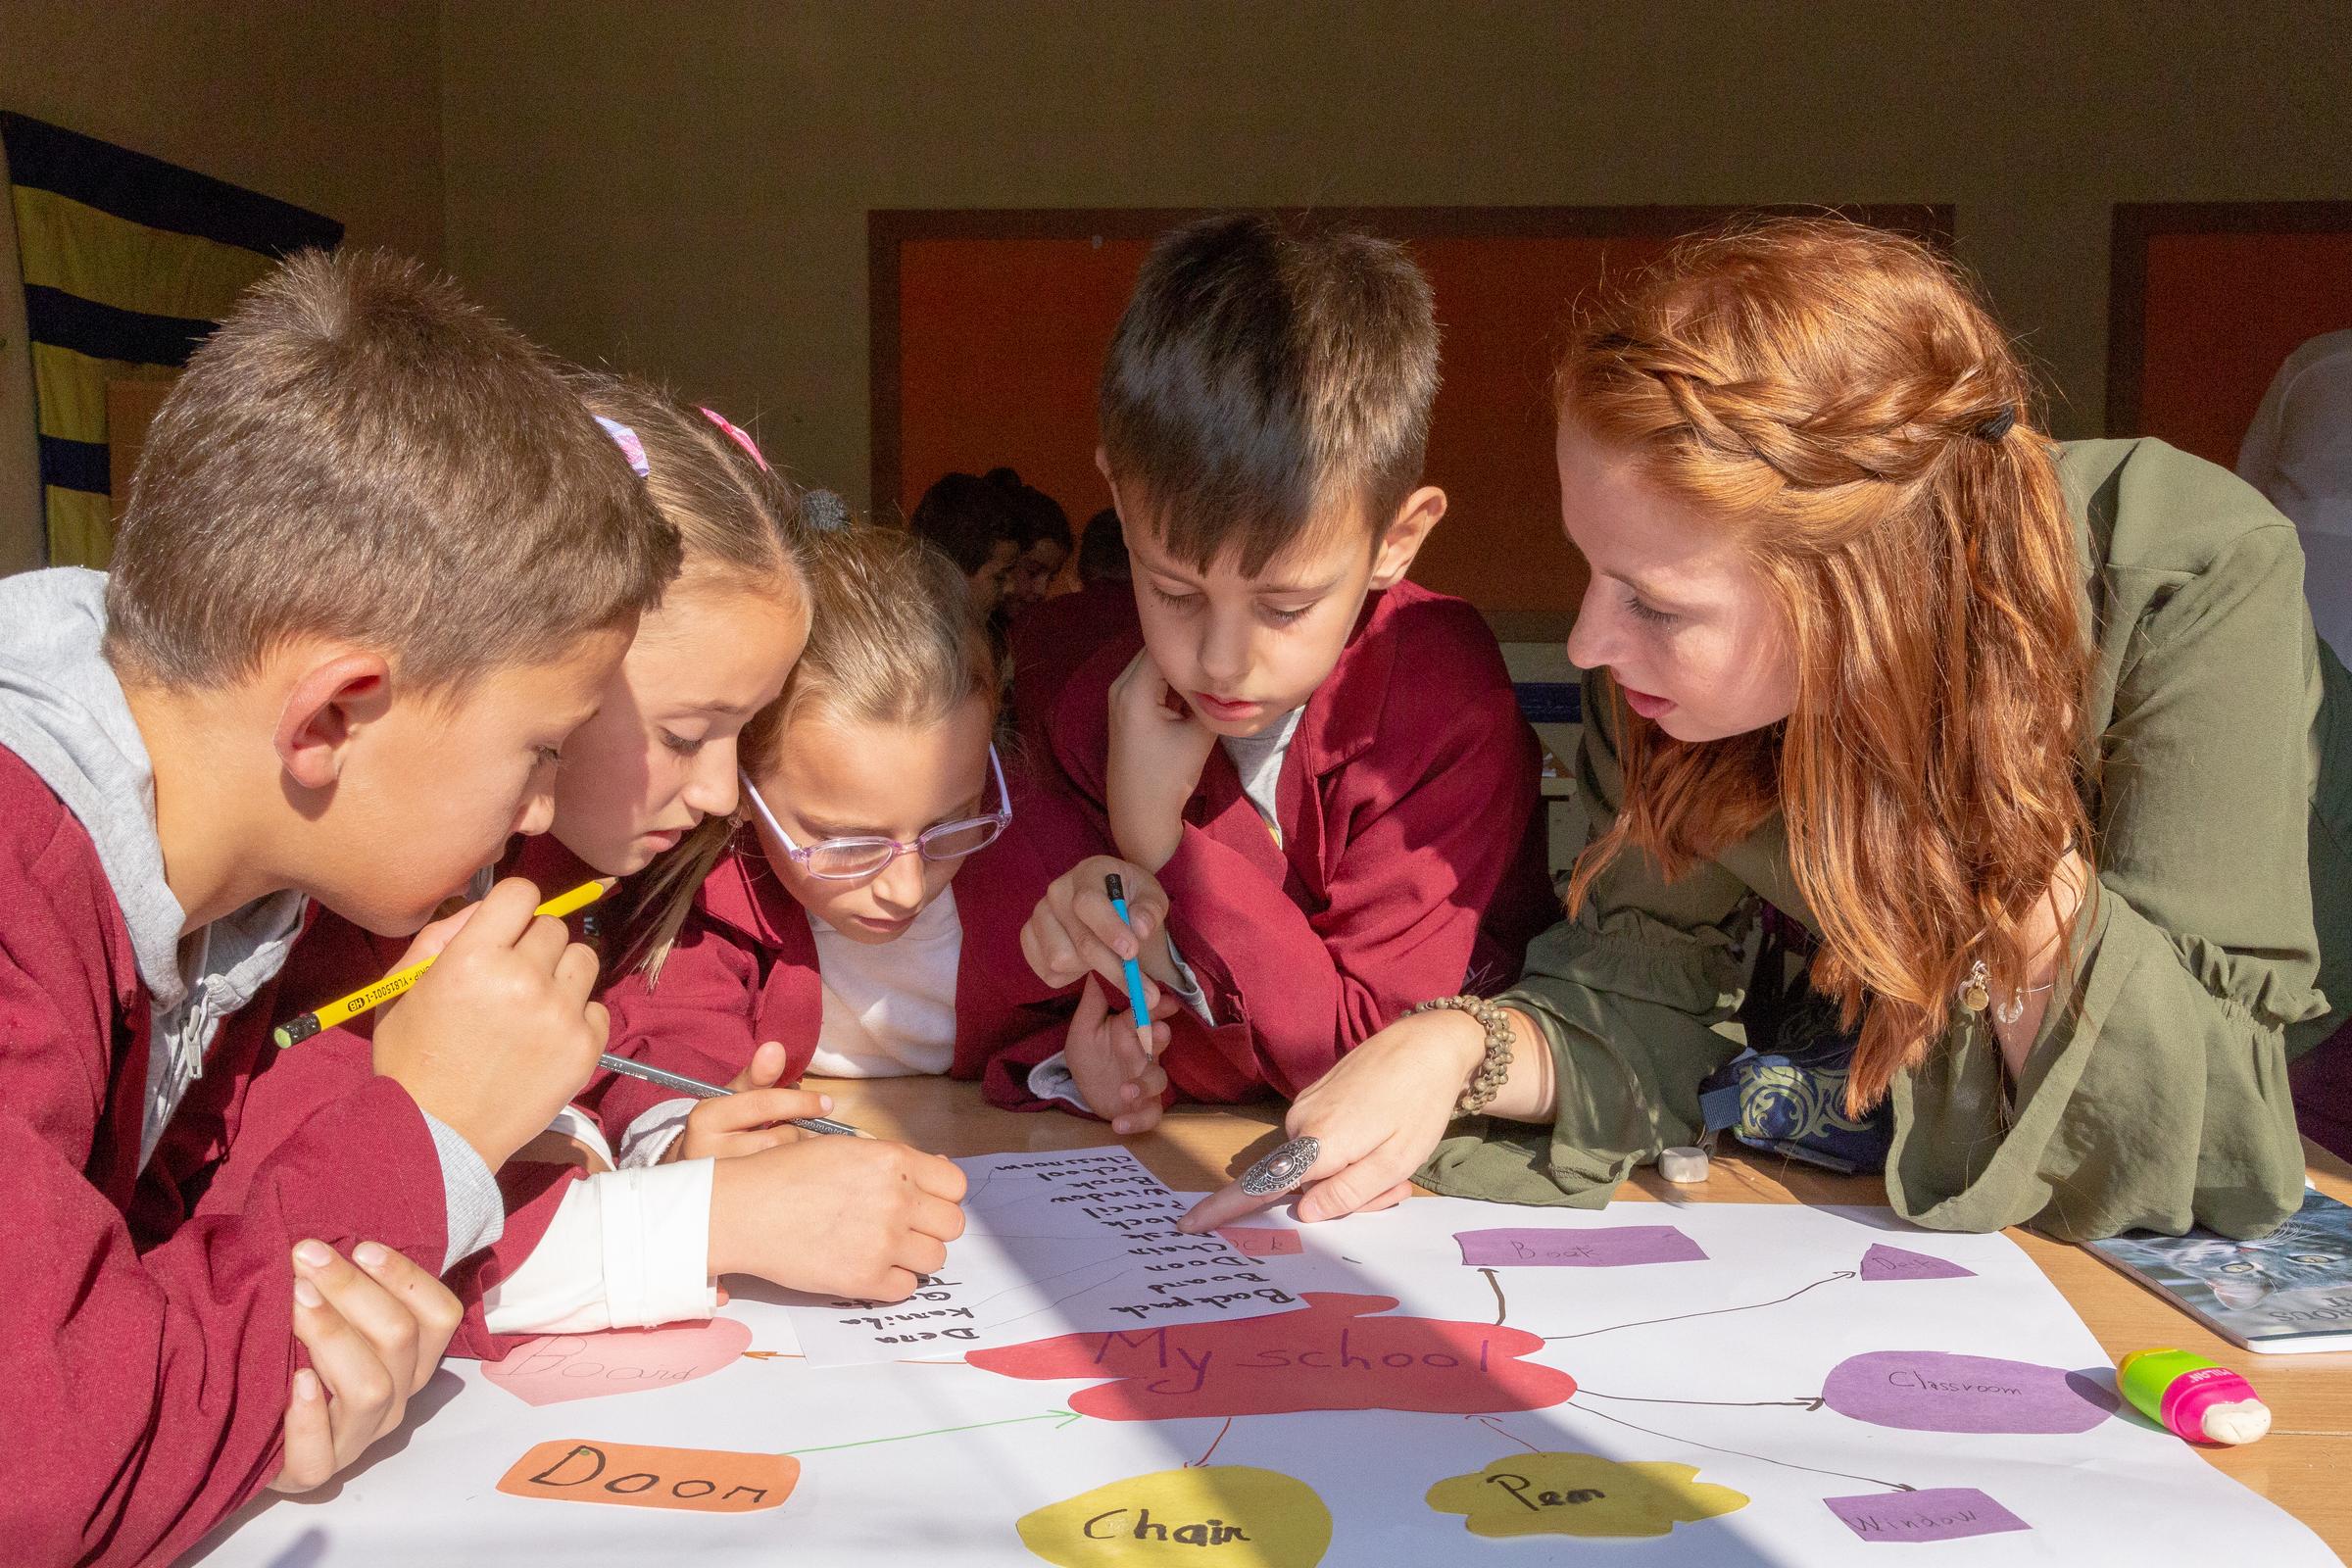 A female Peace Corps Volunteer teaching English to children in Kosovo